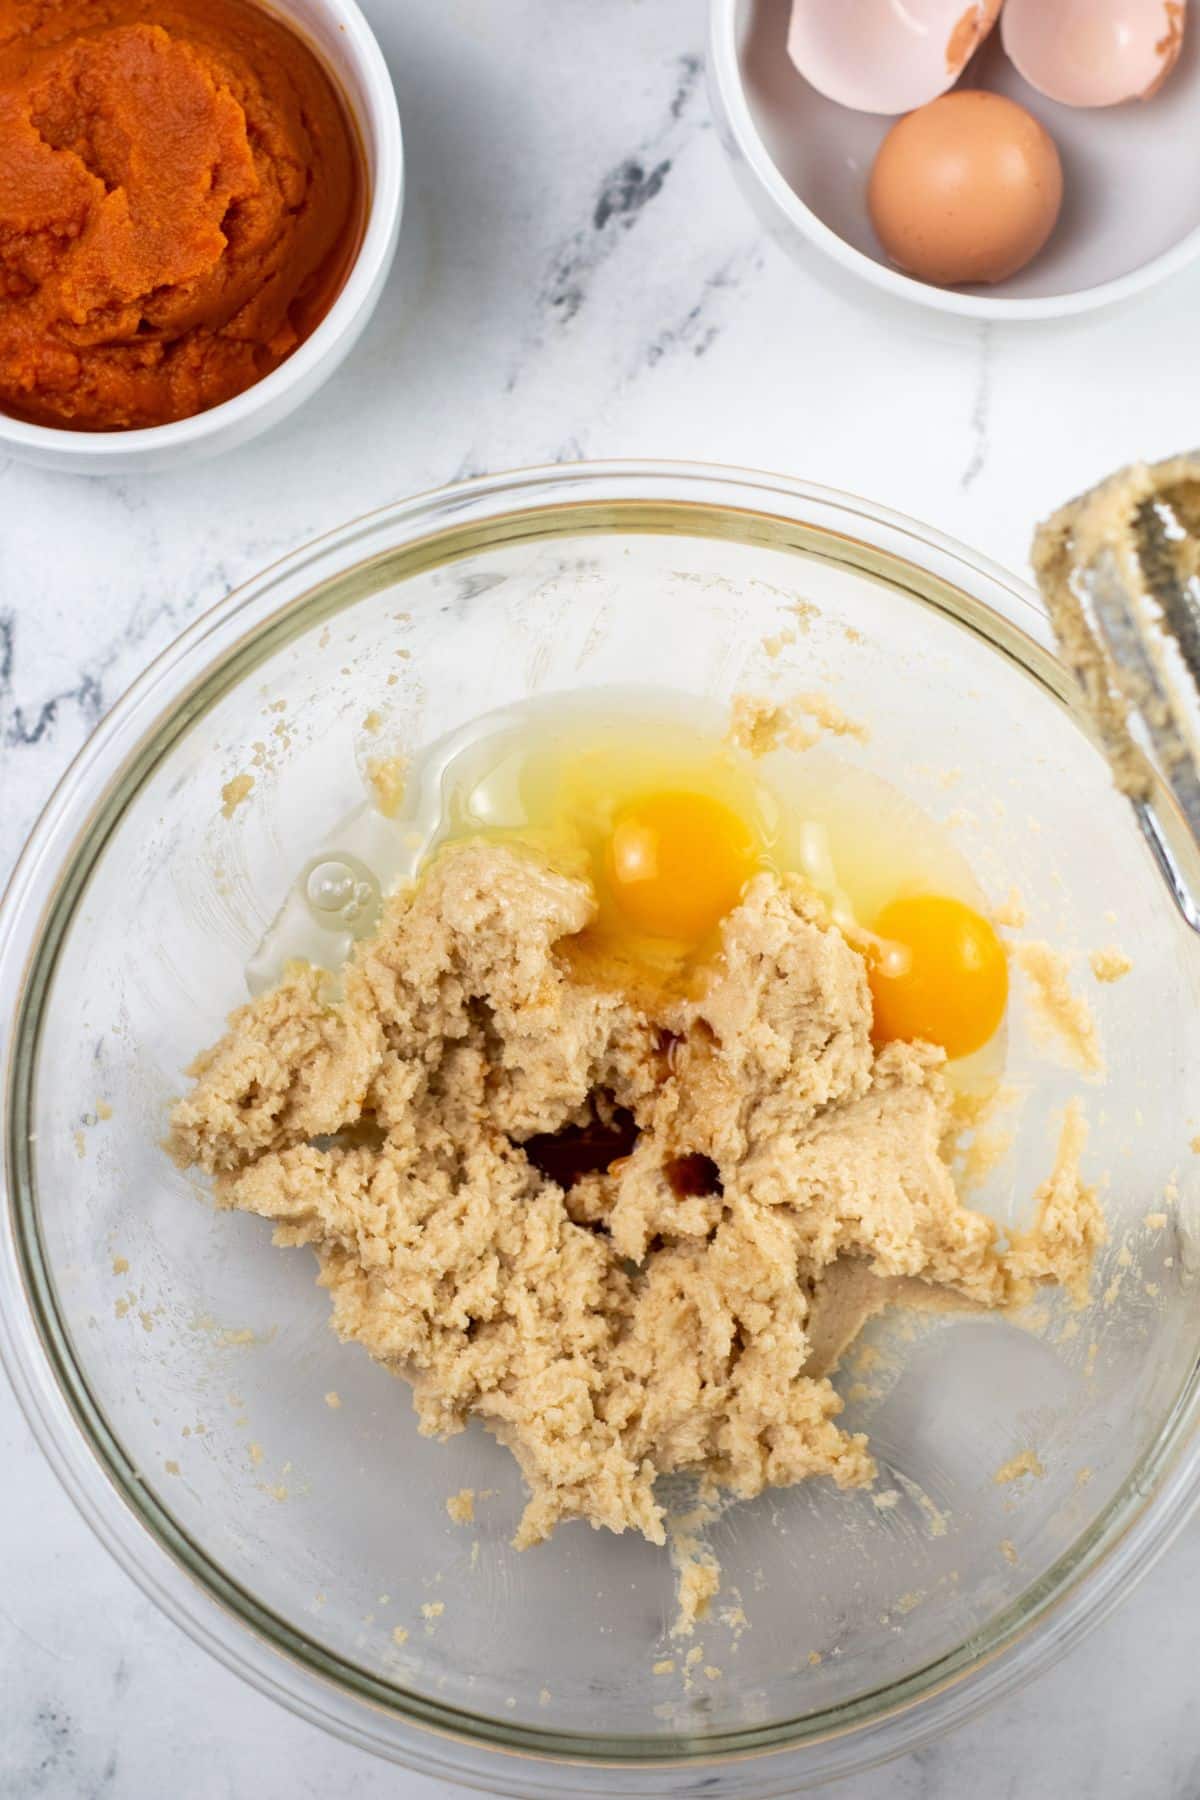 wet ingredients and eggs in bowl